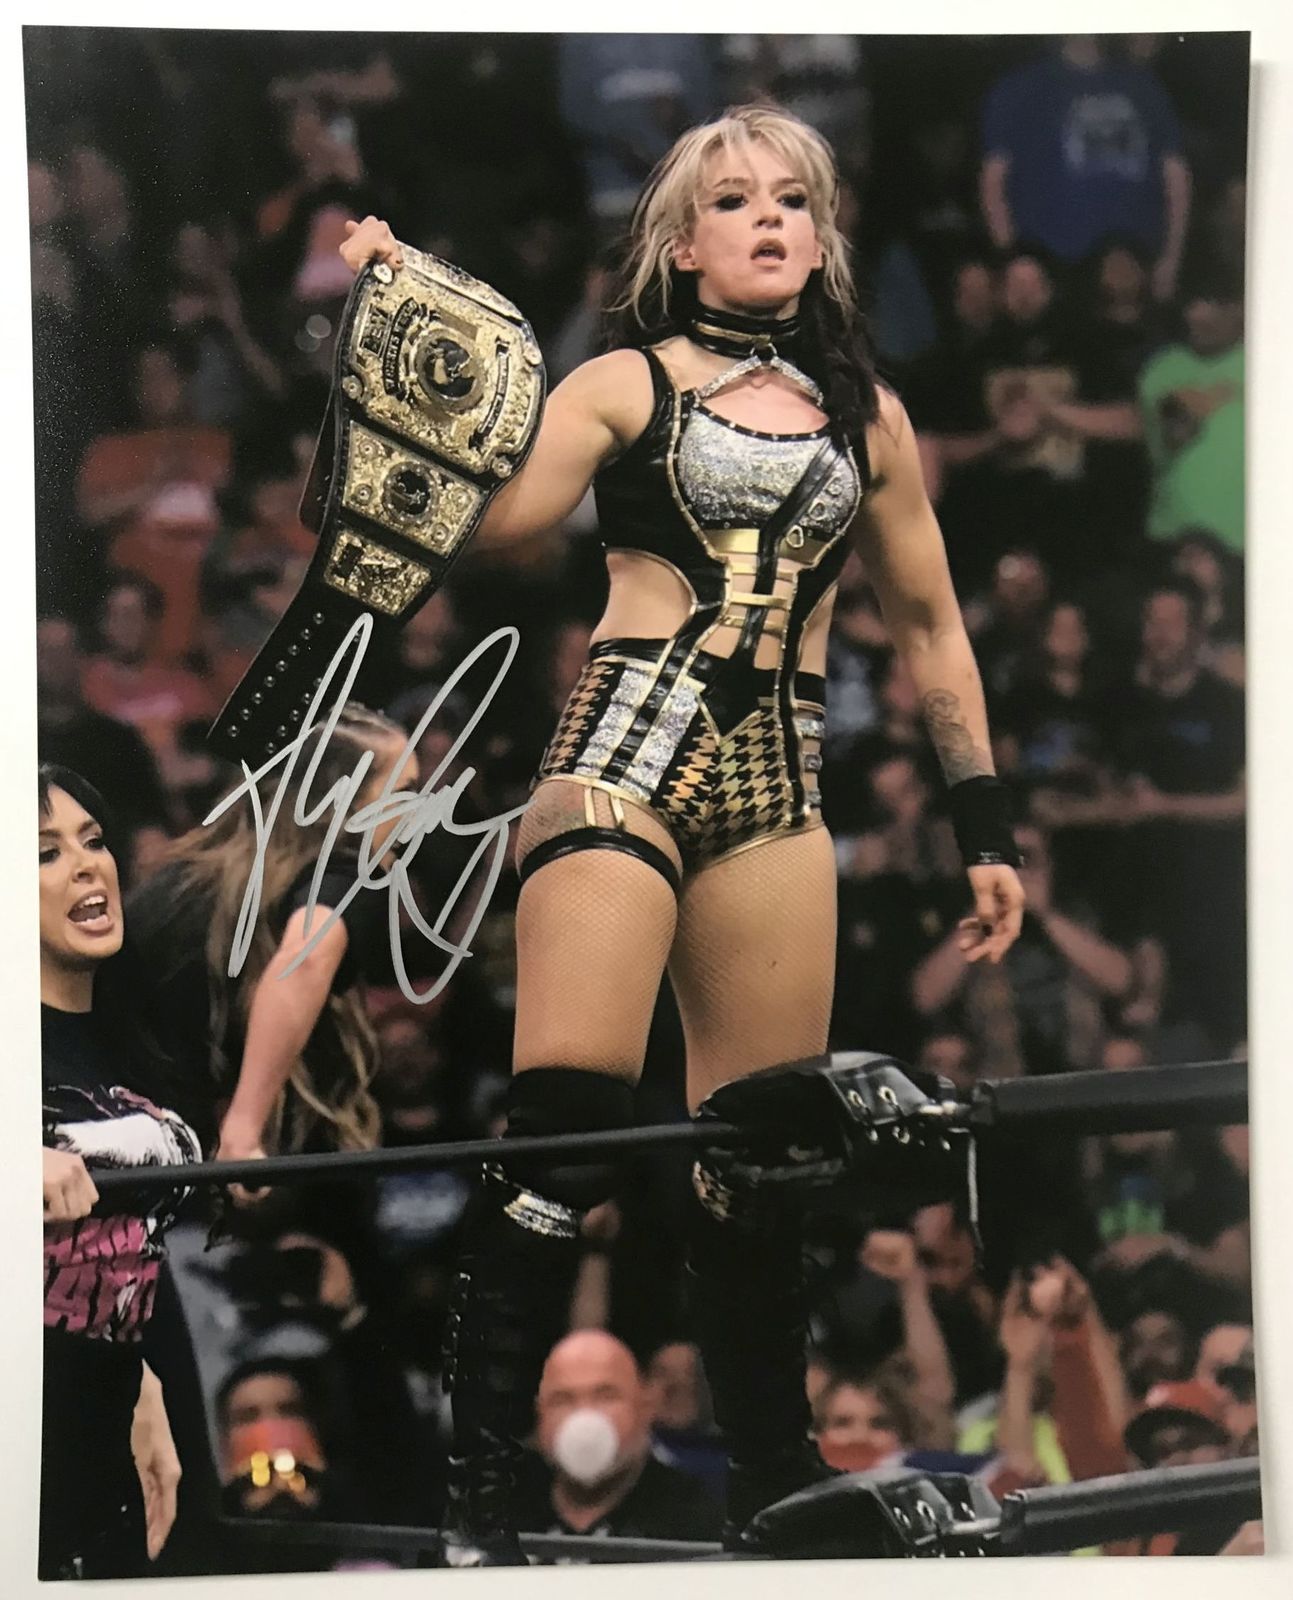 Primary image for Jamie Hayter Autographed WWE Glossy 8x10 Photo